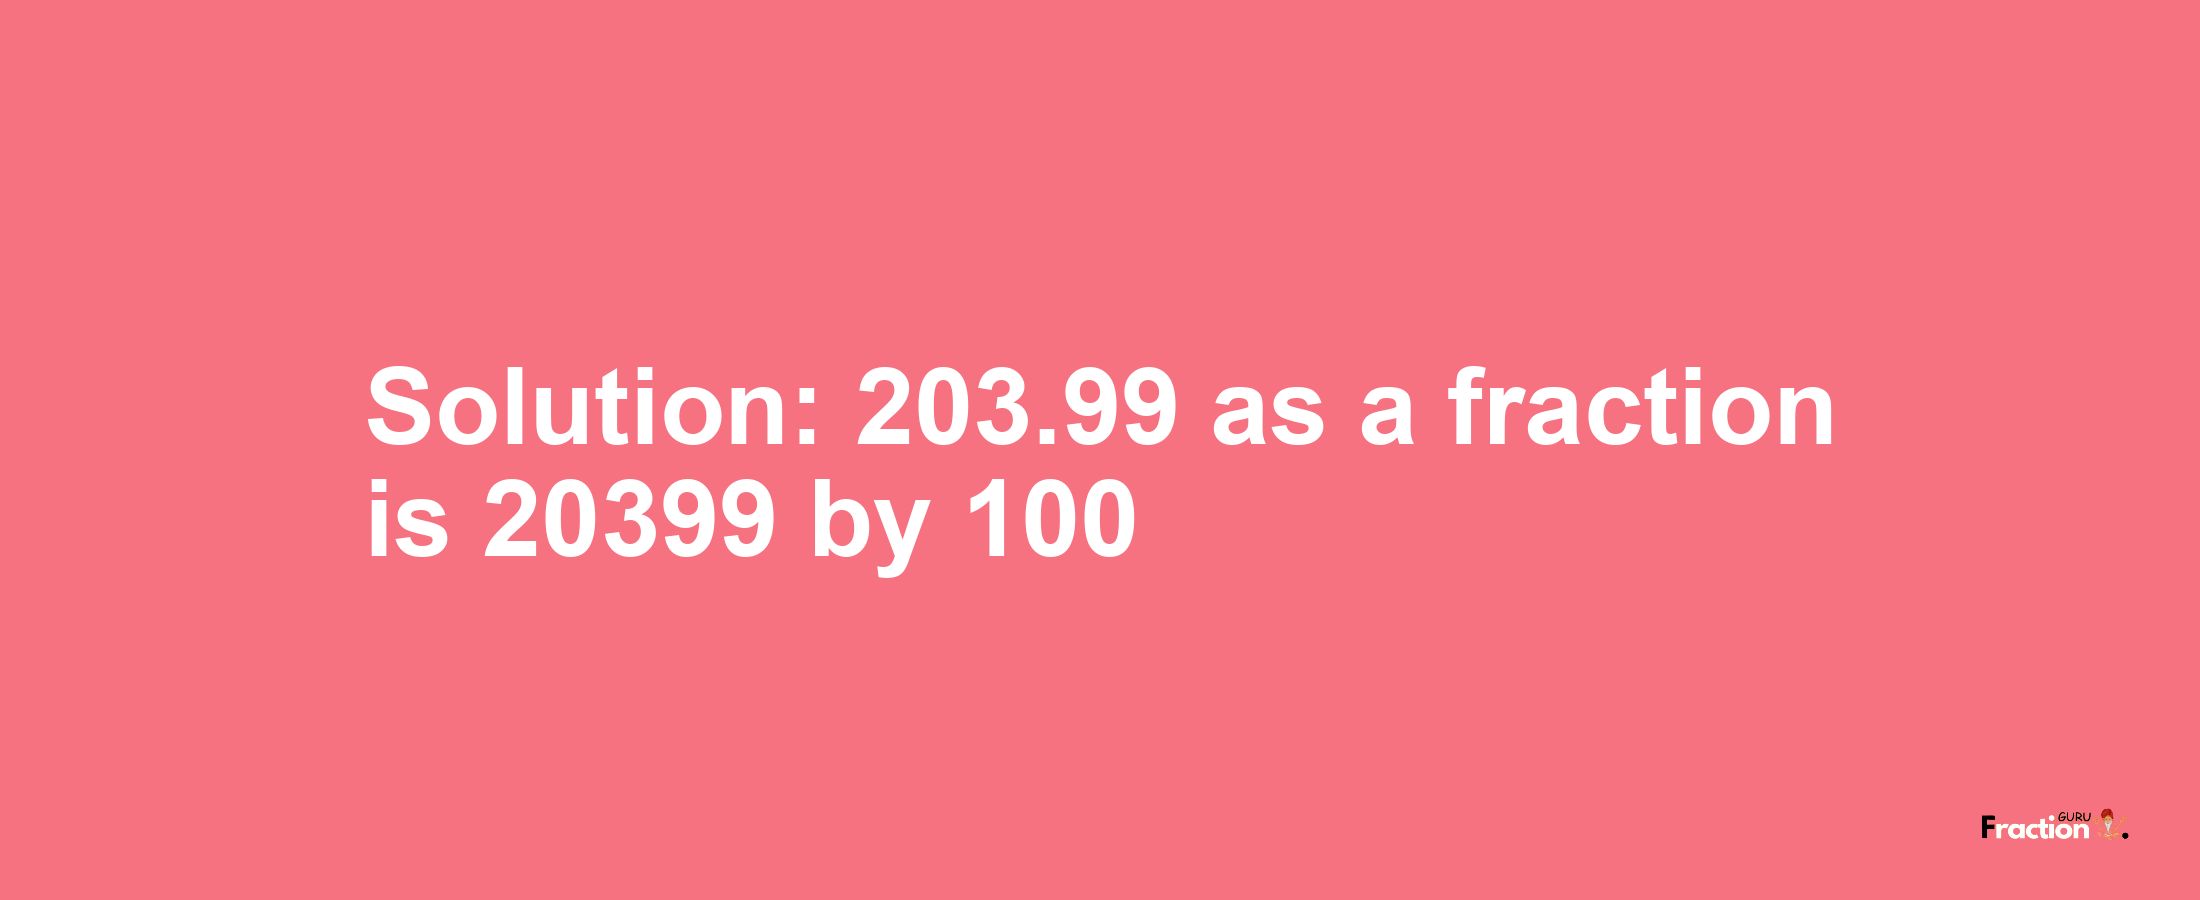 Solution:203.99 as a fraction is 20399/100